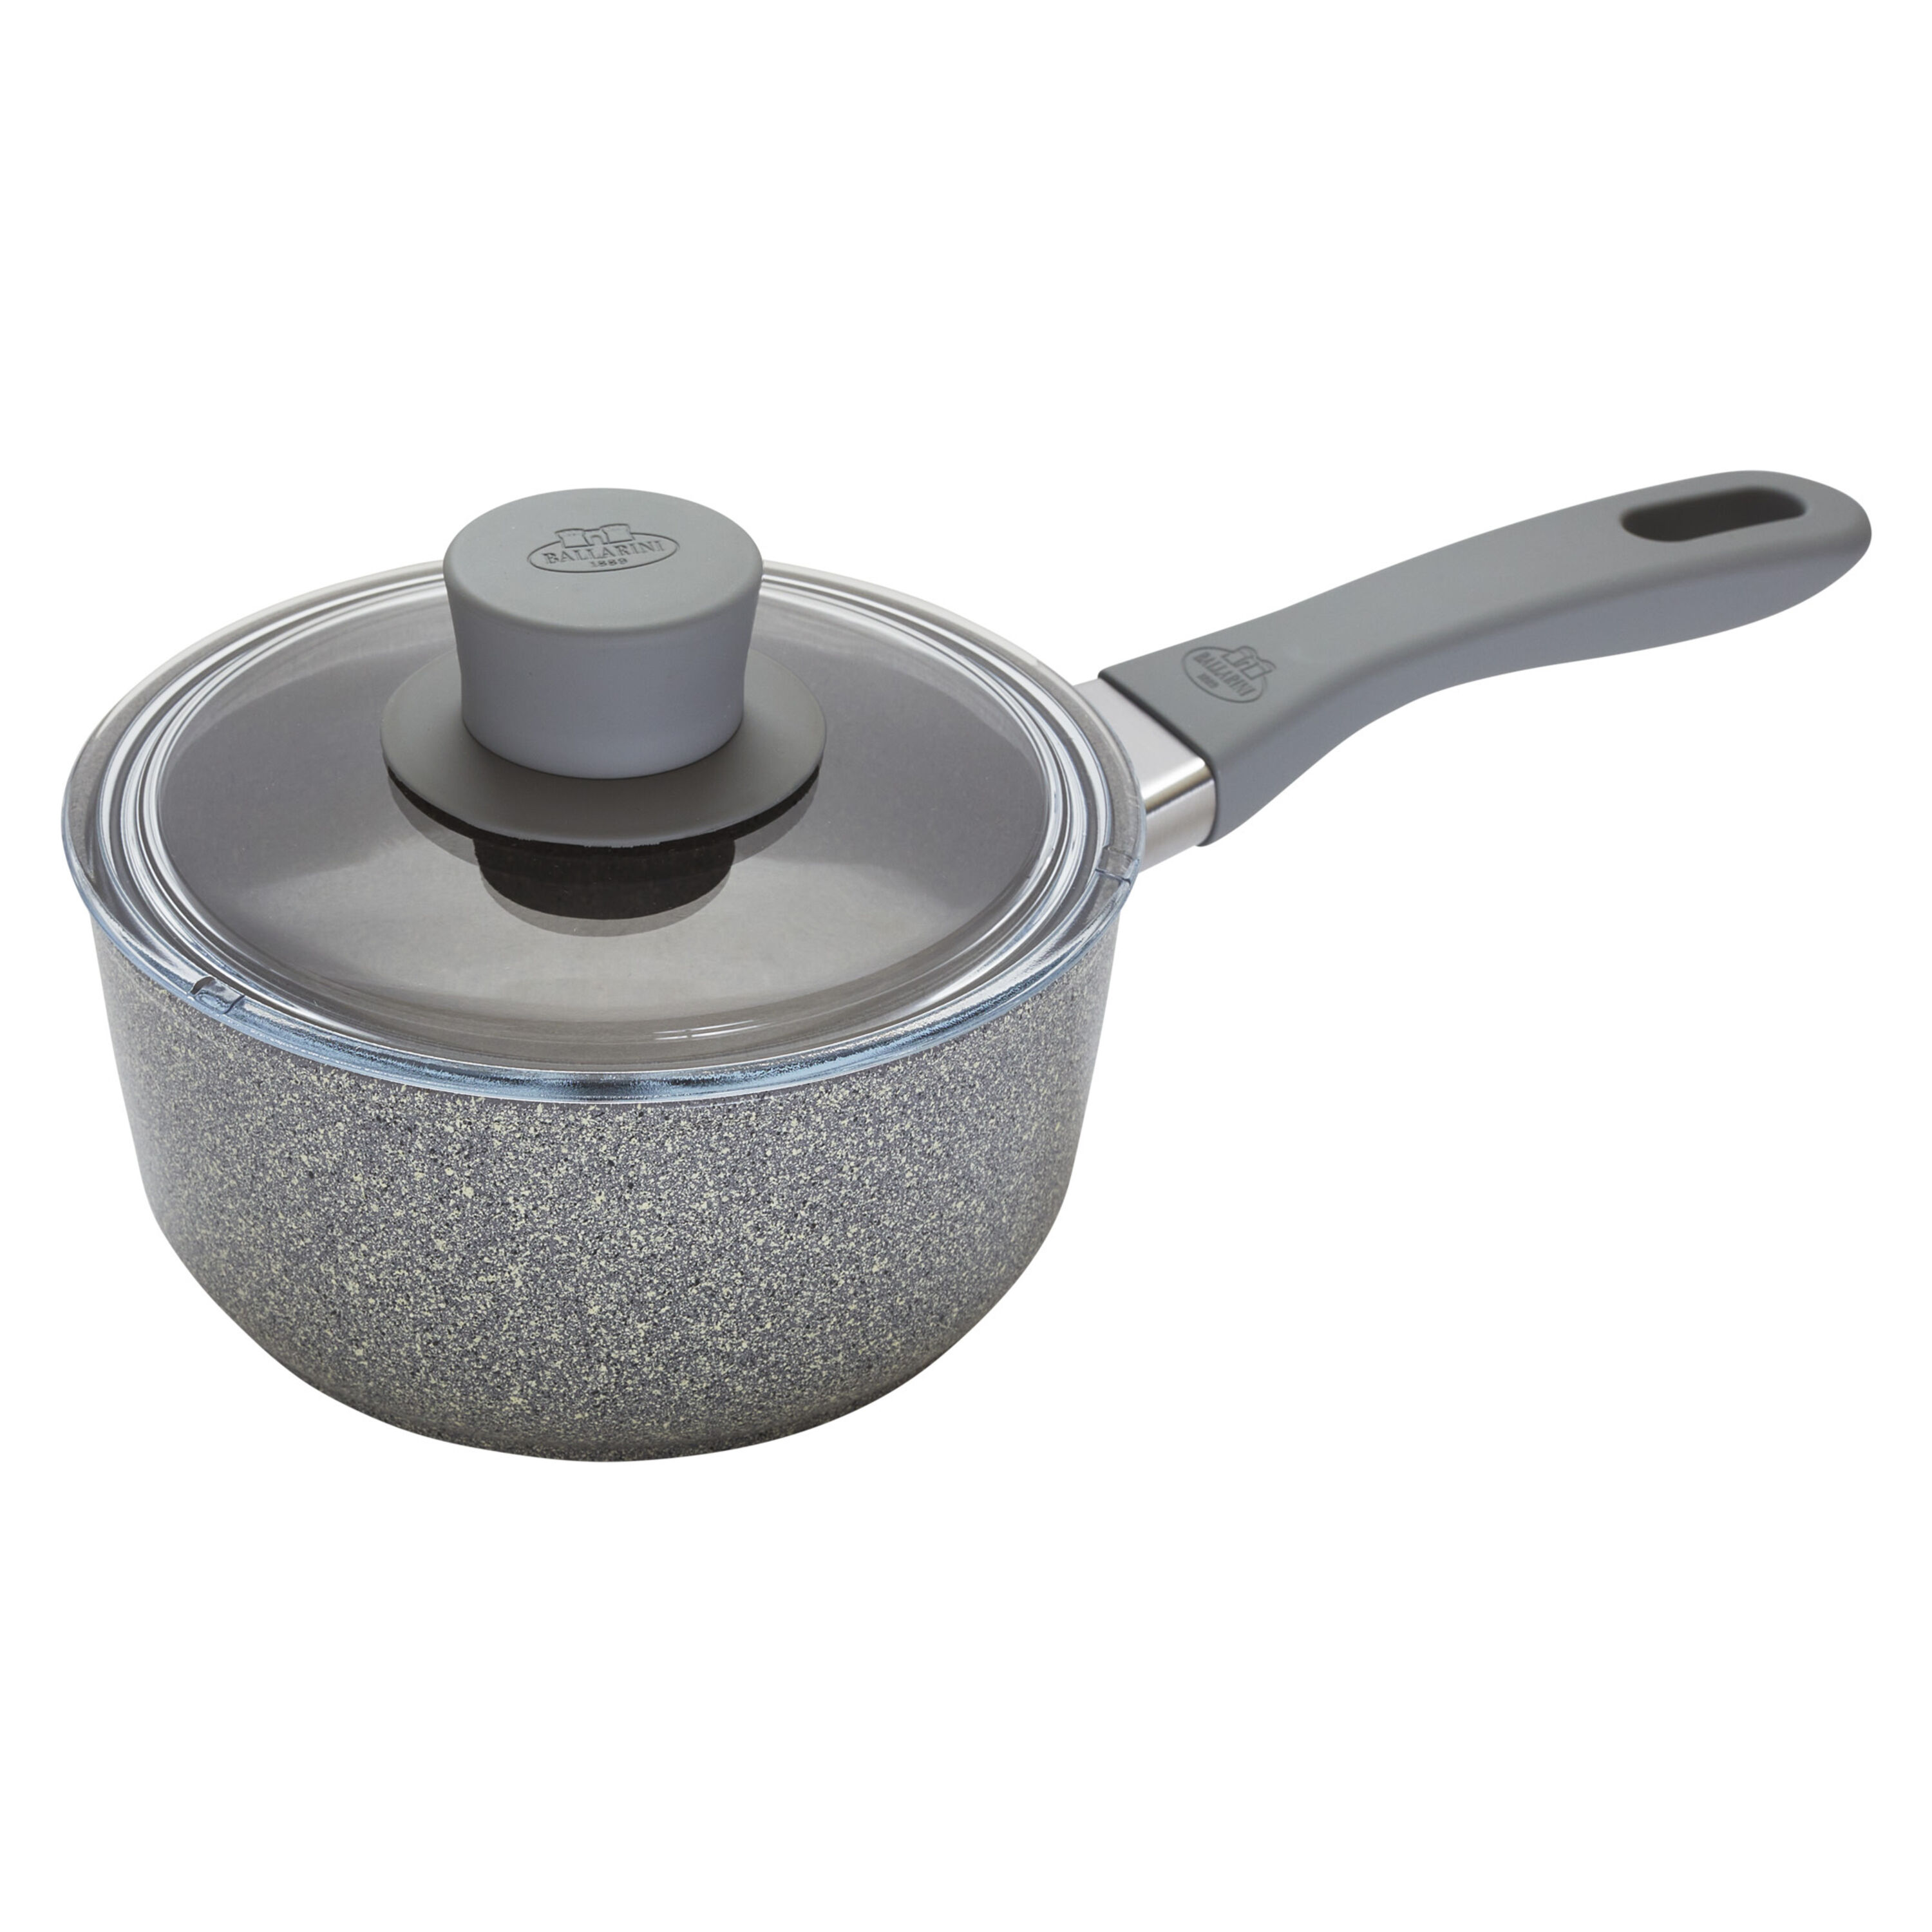 1.5 Qt Sauce Pan with Lid, Formed Aluminum Cookware